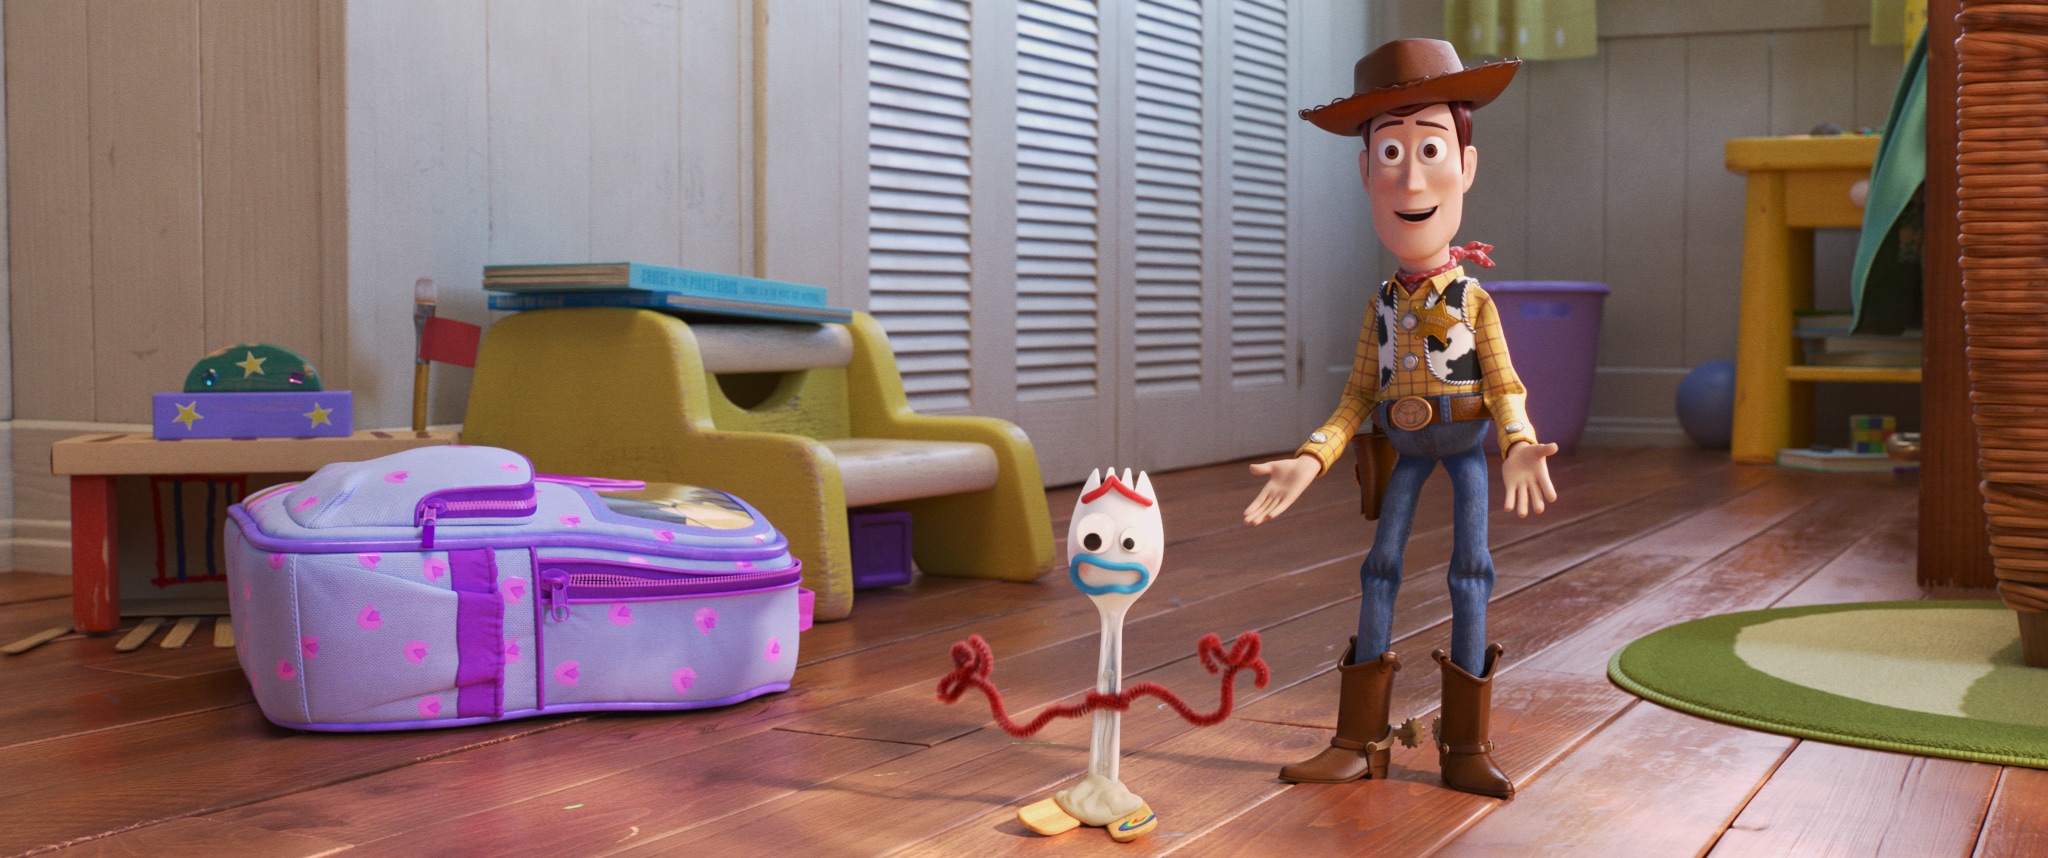 TOY STORY 4 forky and woody